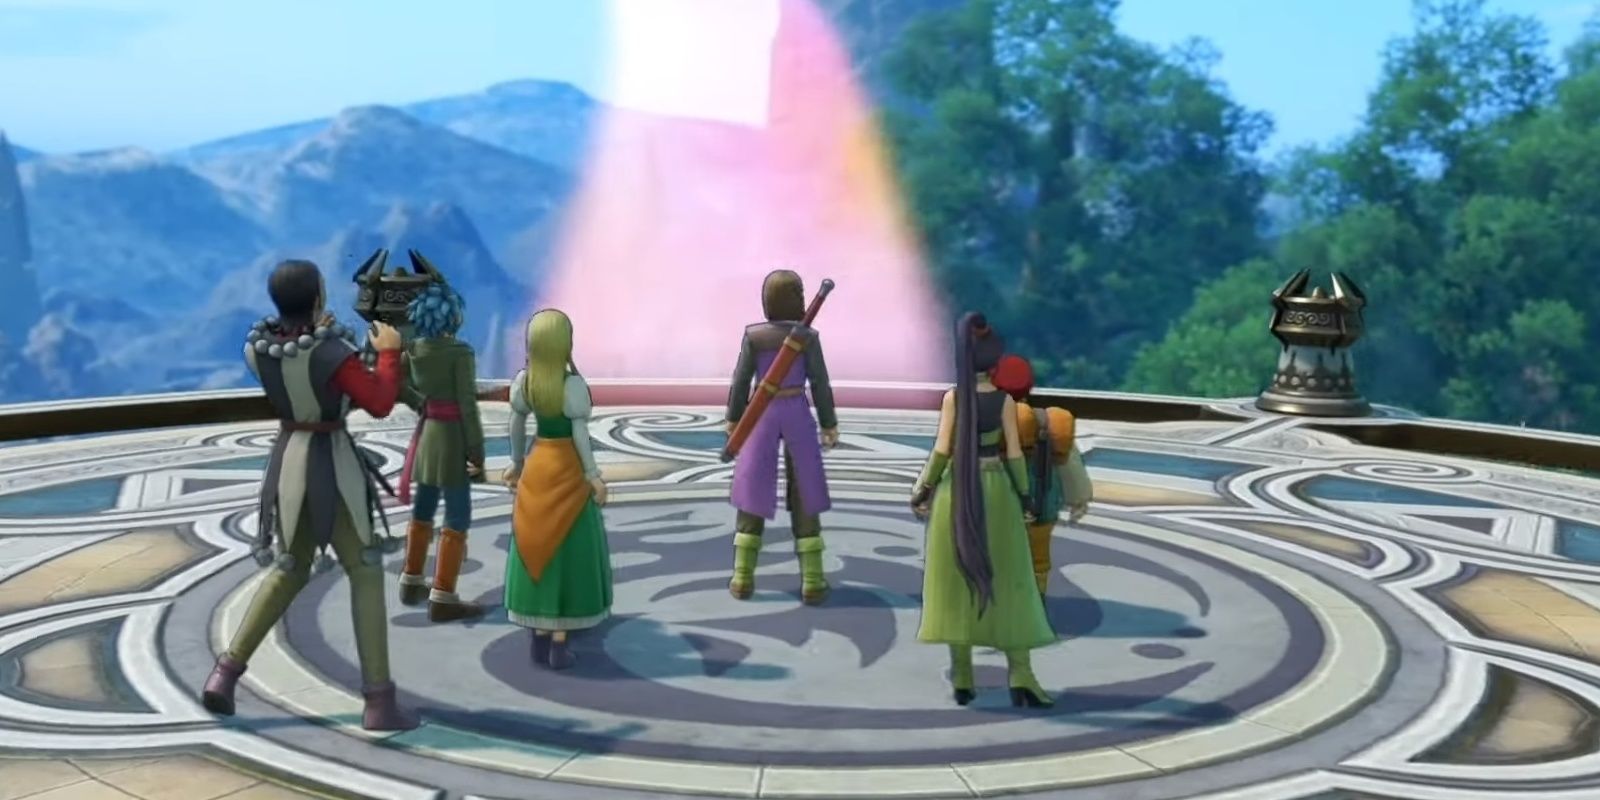 the party from dq 11 standing together